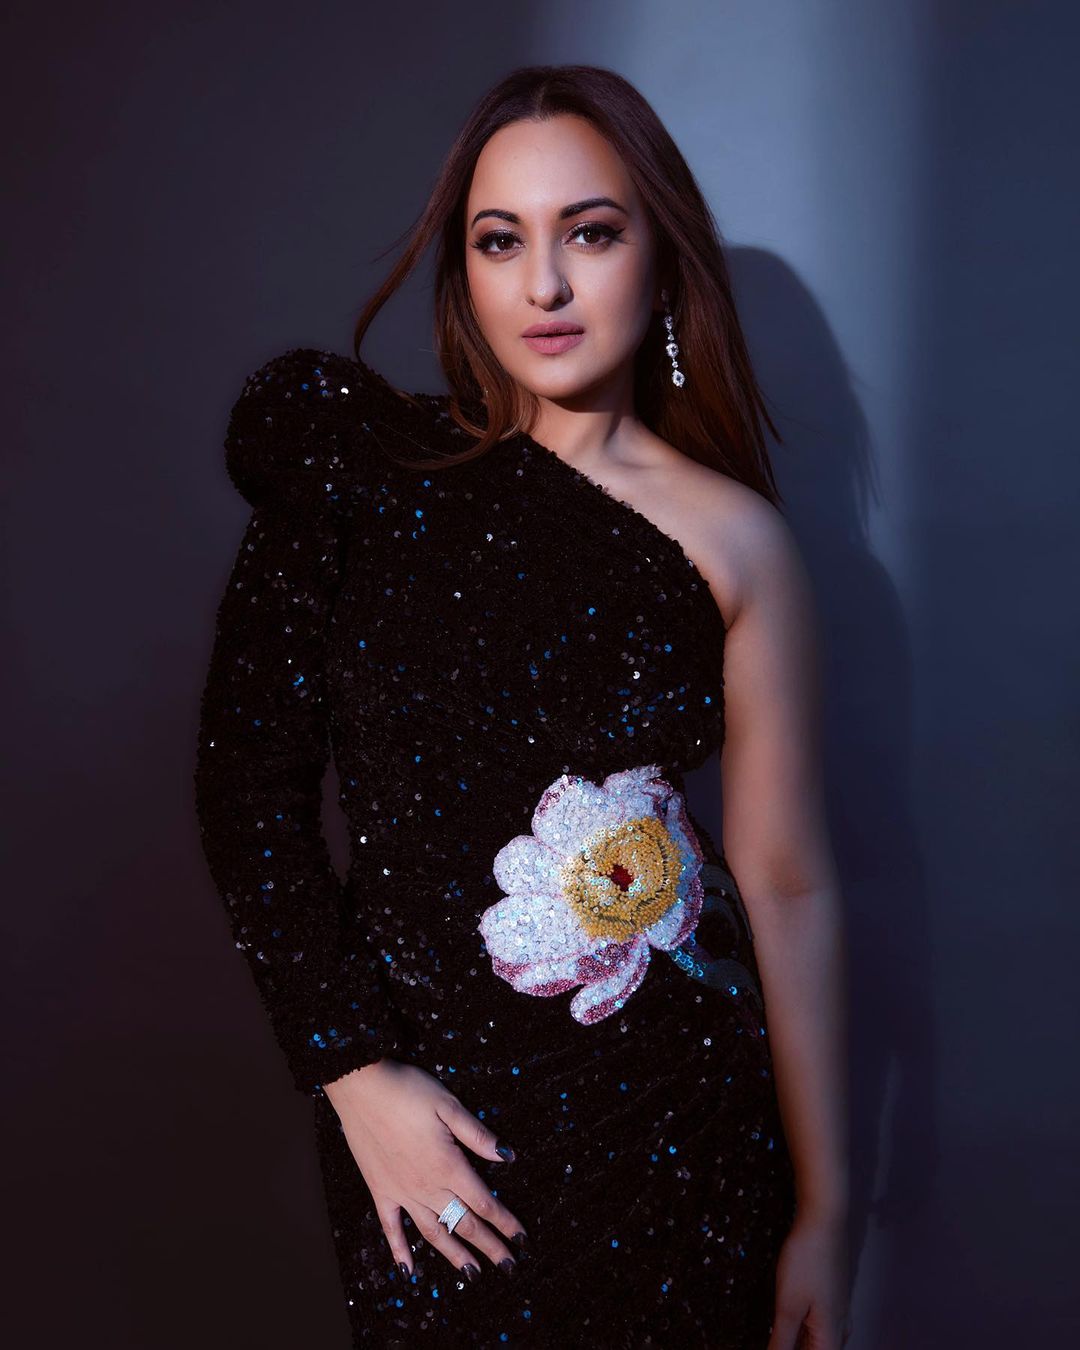 Sonakshi Sinha looks fabulous in the black dress with a huge white flower embellishing it